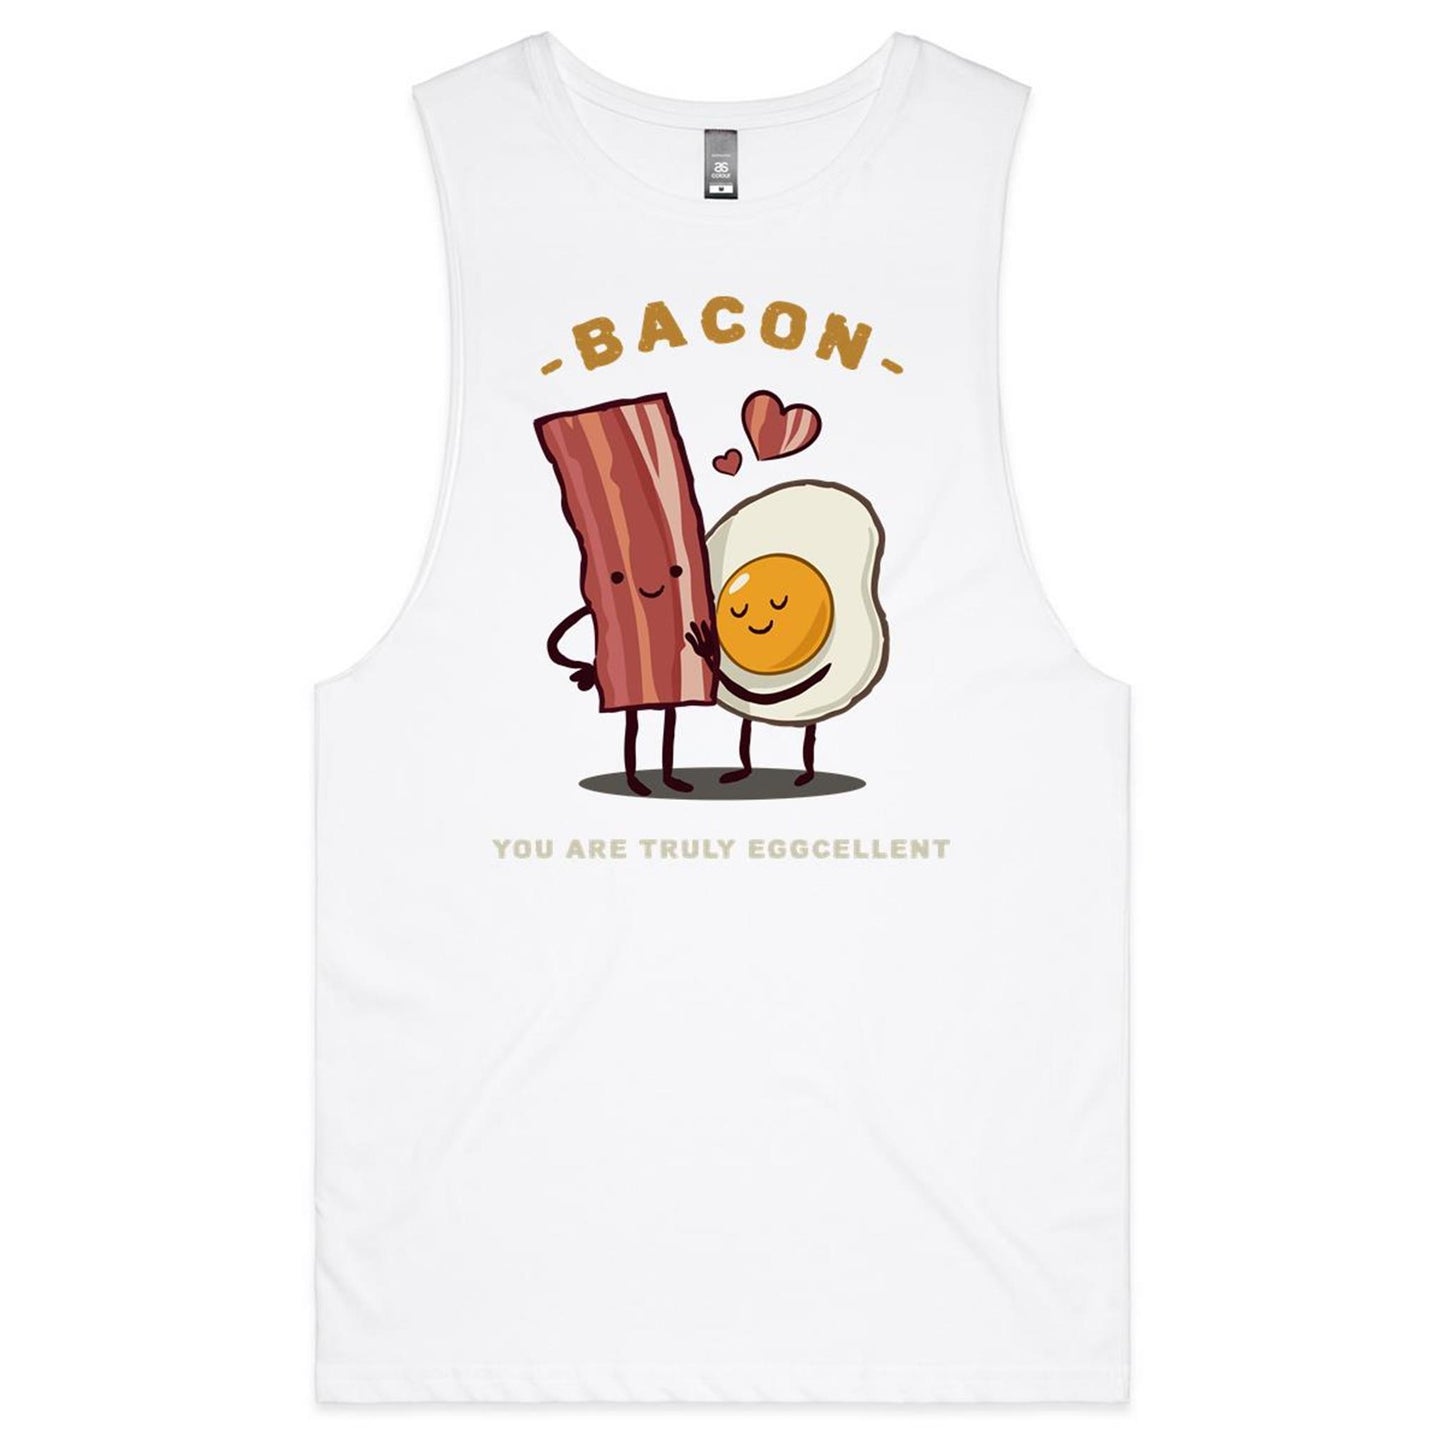 Bacon, You Are Truly Eggcellent - Mens Tank Top Tee White Mens Tank Tee